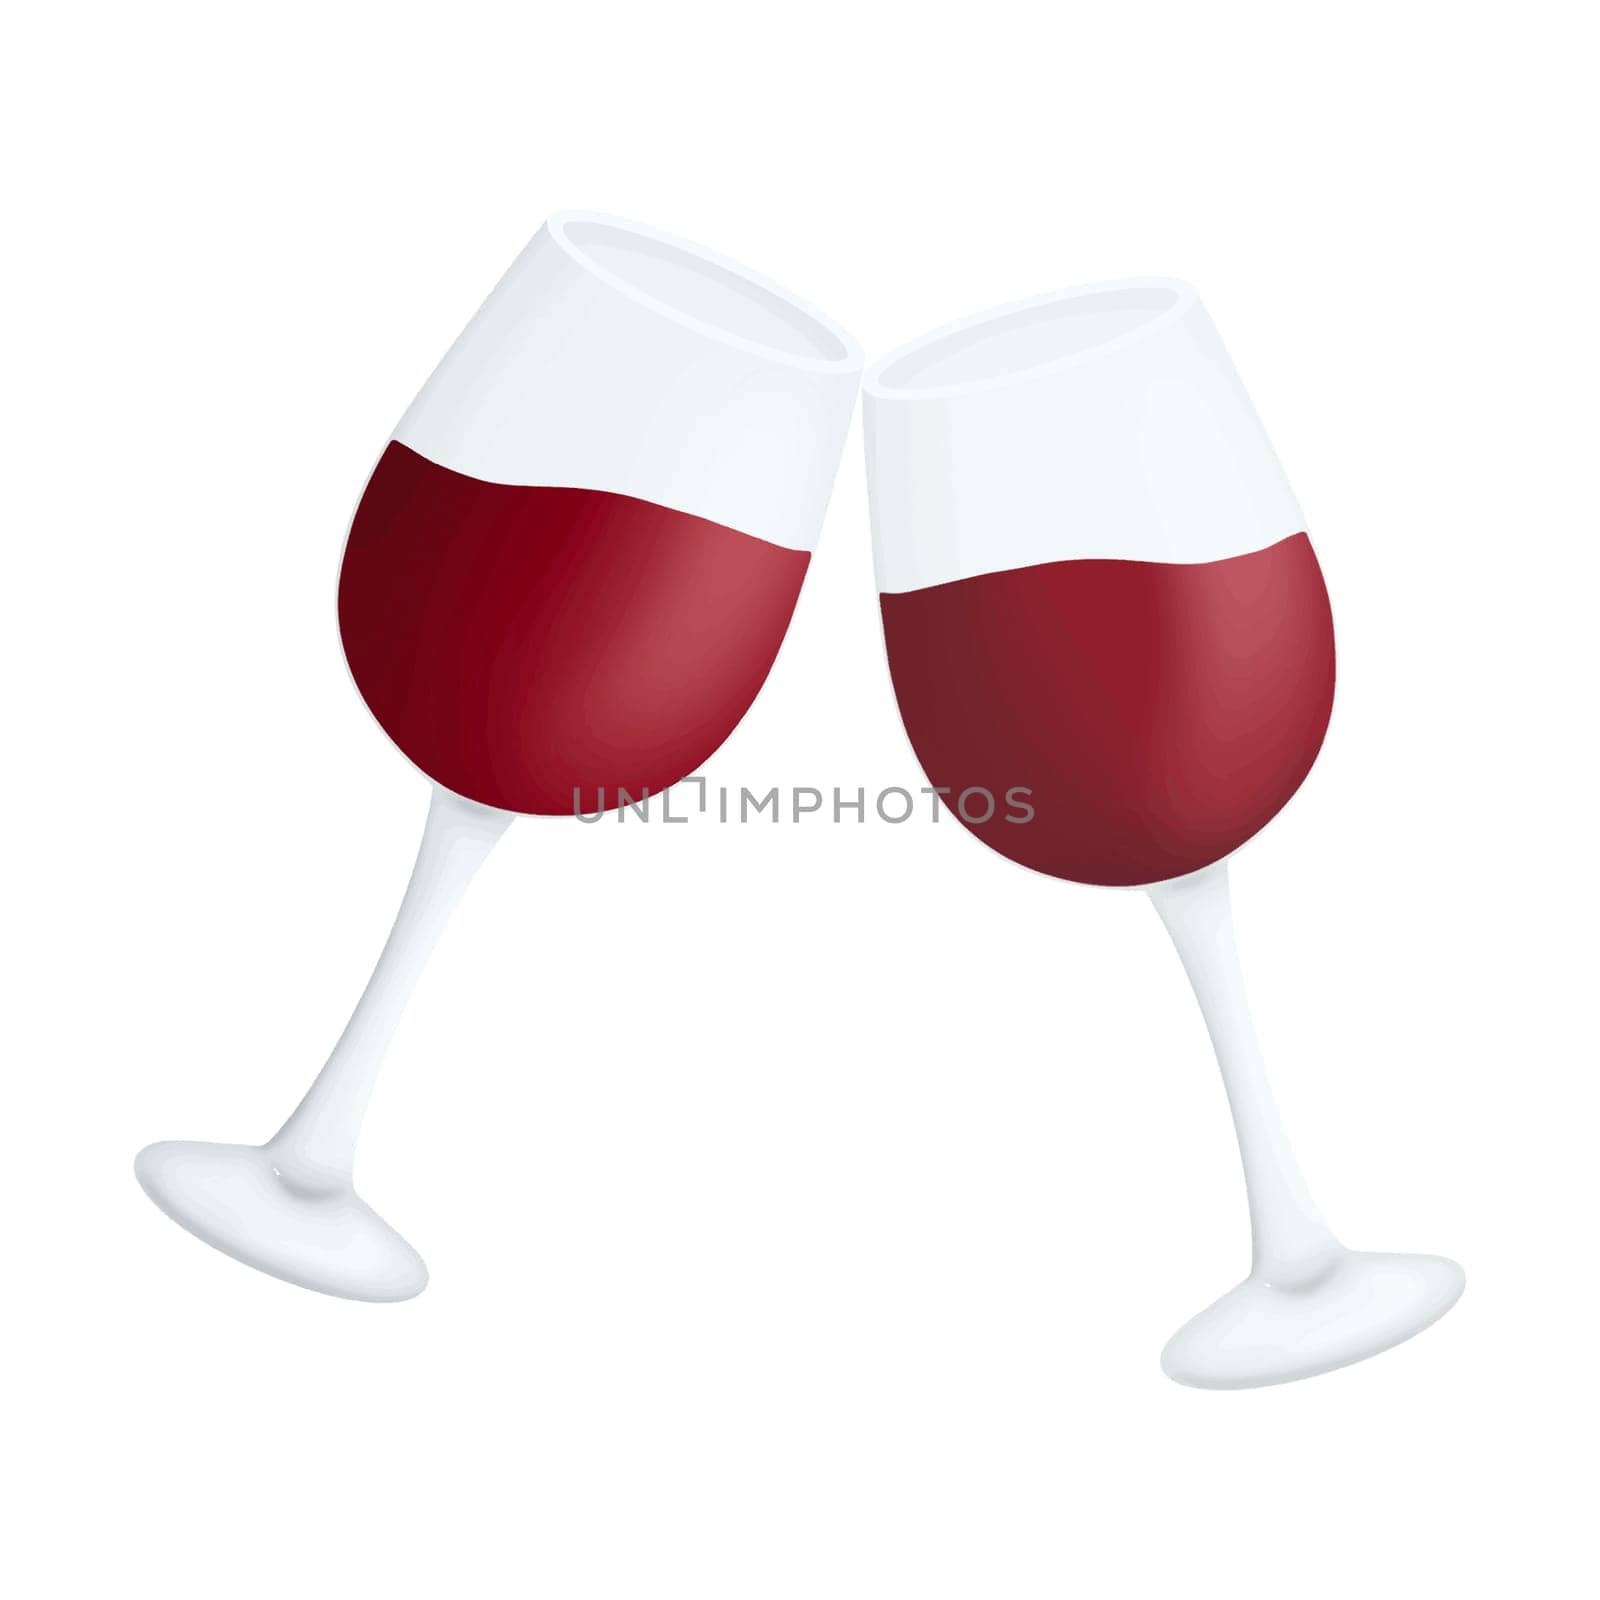 Two glasses red wine toasting party illustration isolated clipart  by Skyecreativestudio